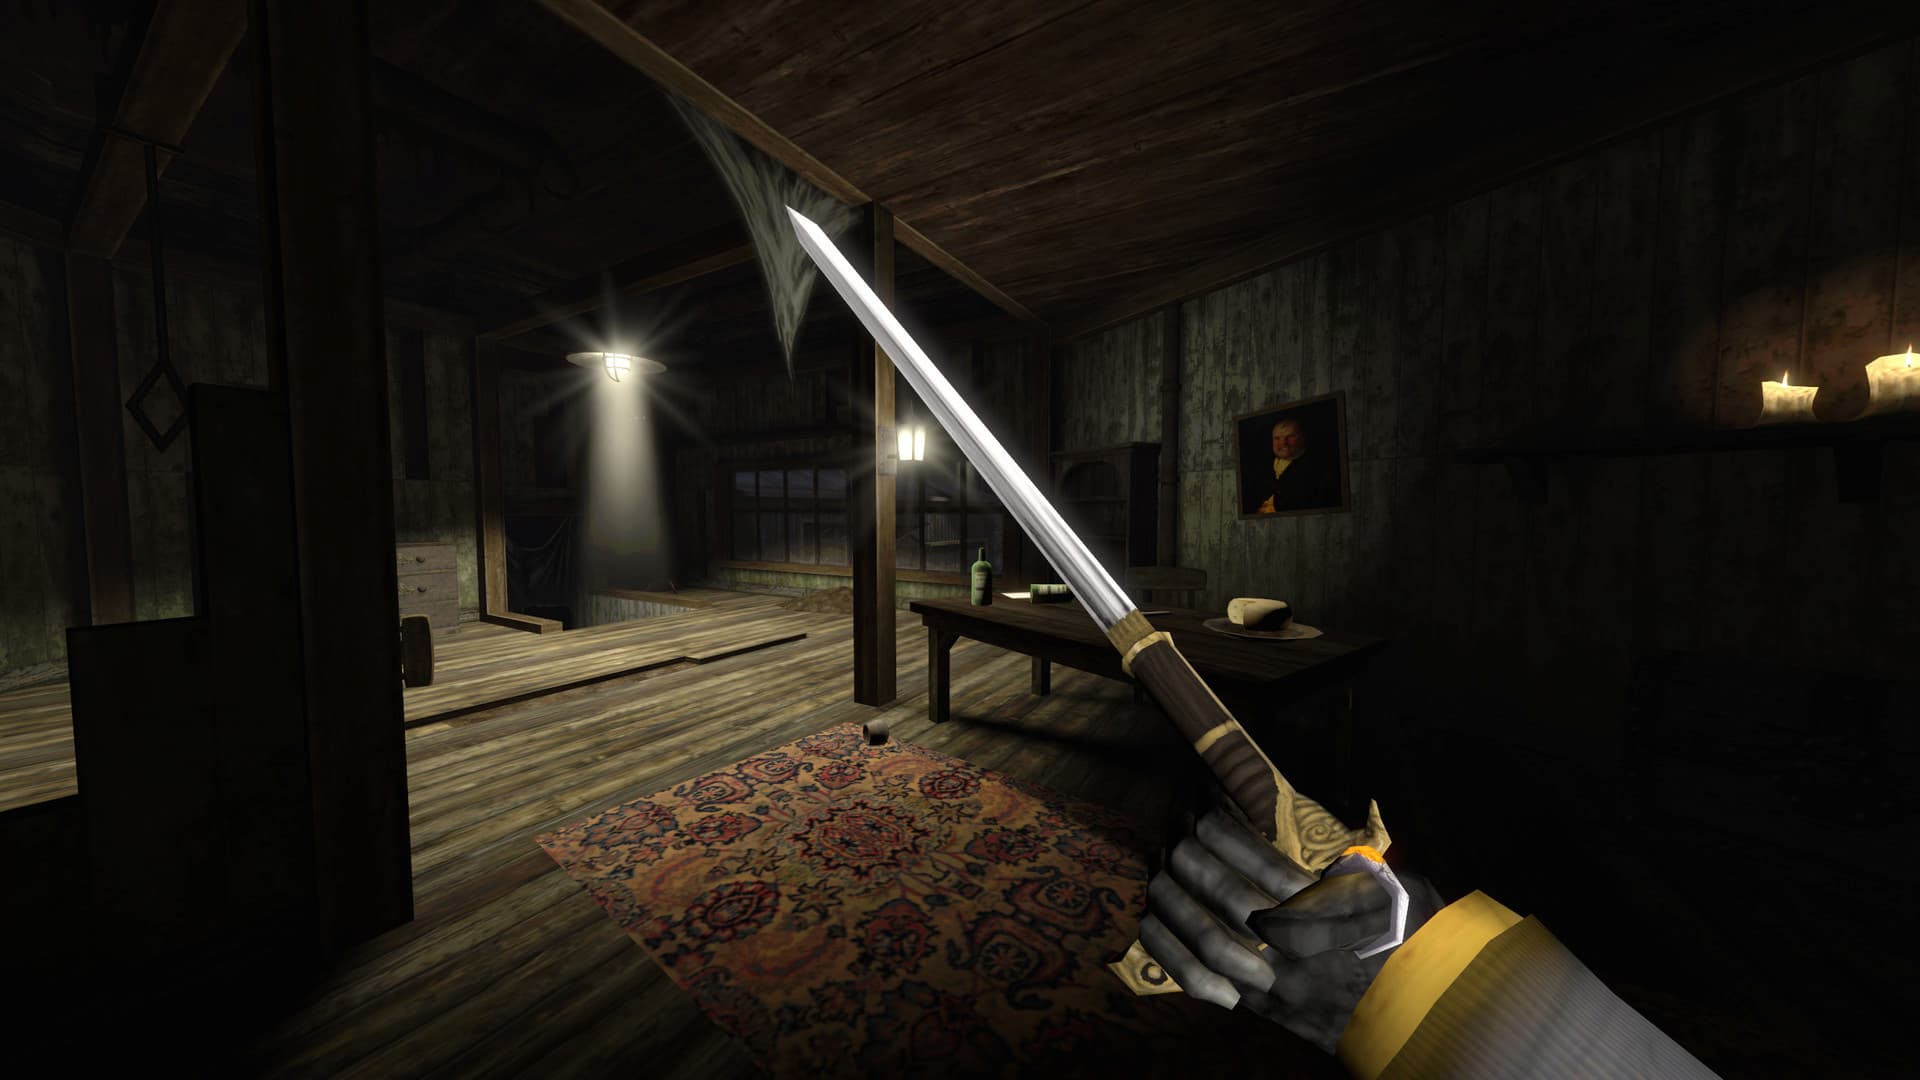 Gloomwood Gameplay screenshot of character holding a sharpened cane as a weapon in a gloomy room, Gloomwood Early Access Release Date